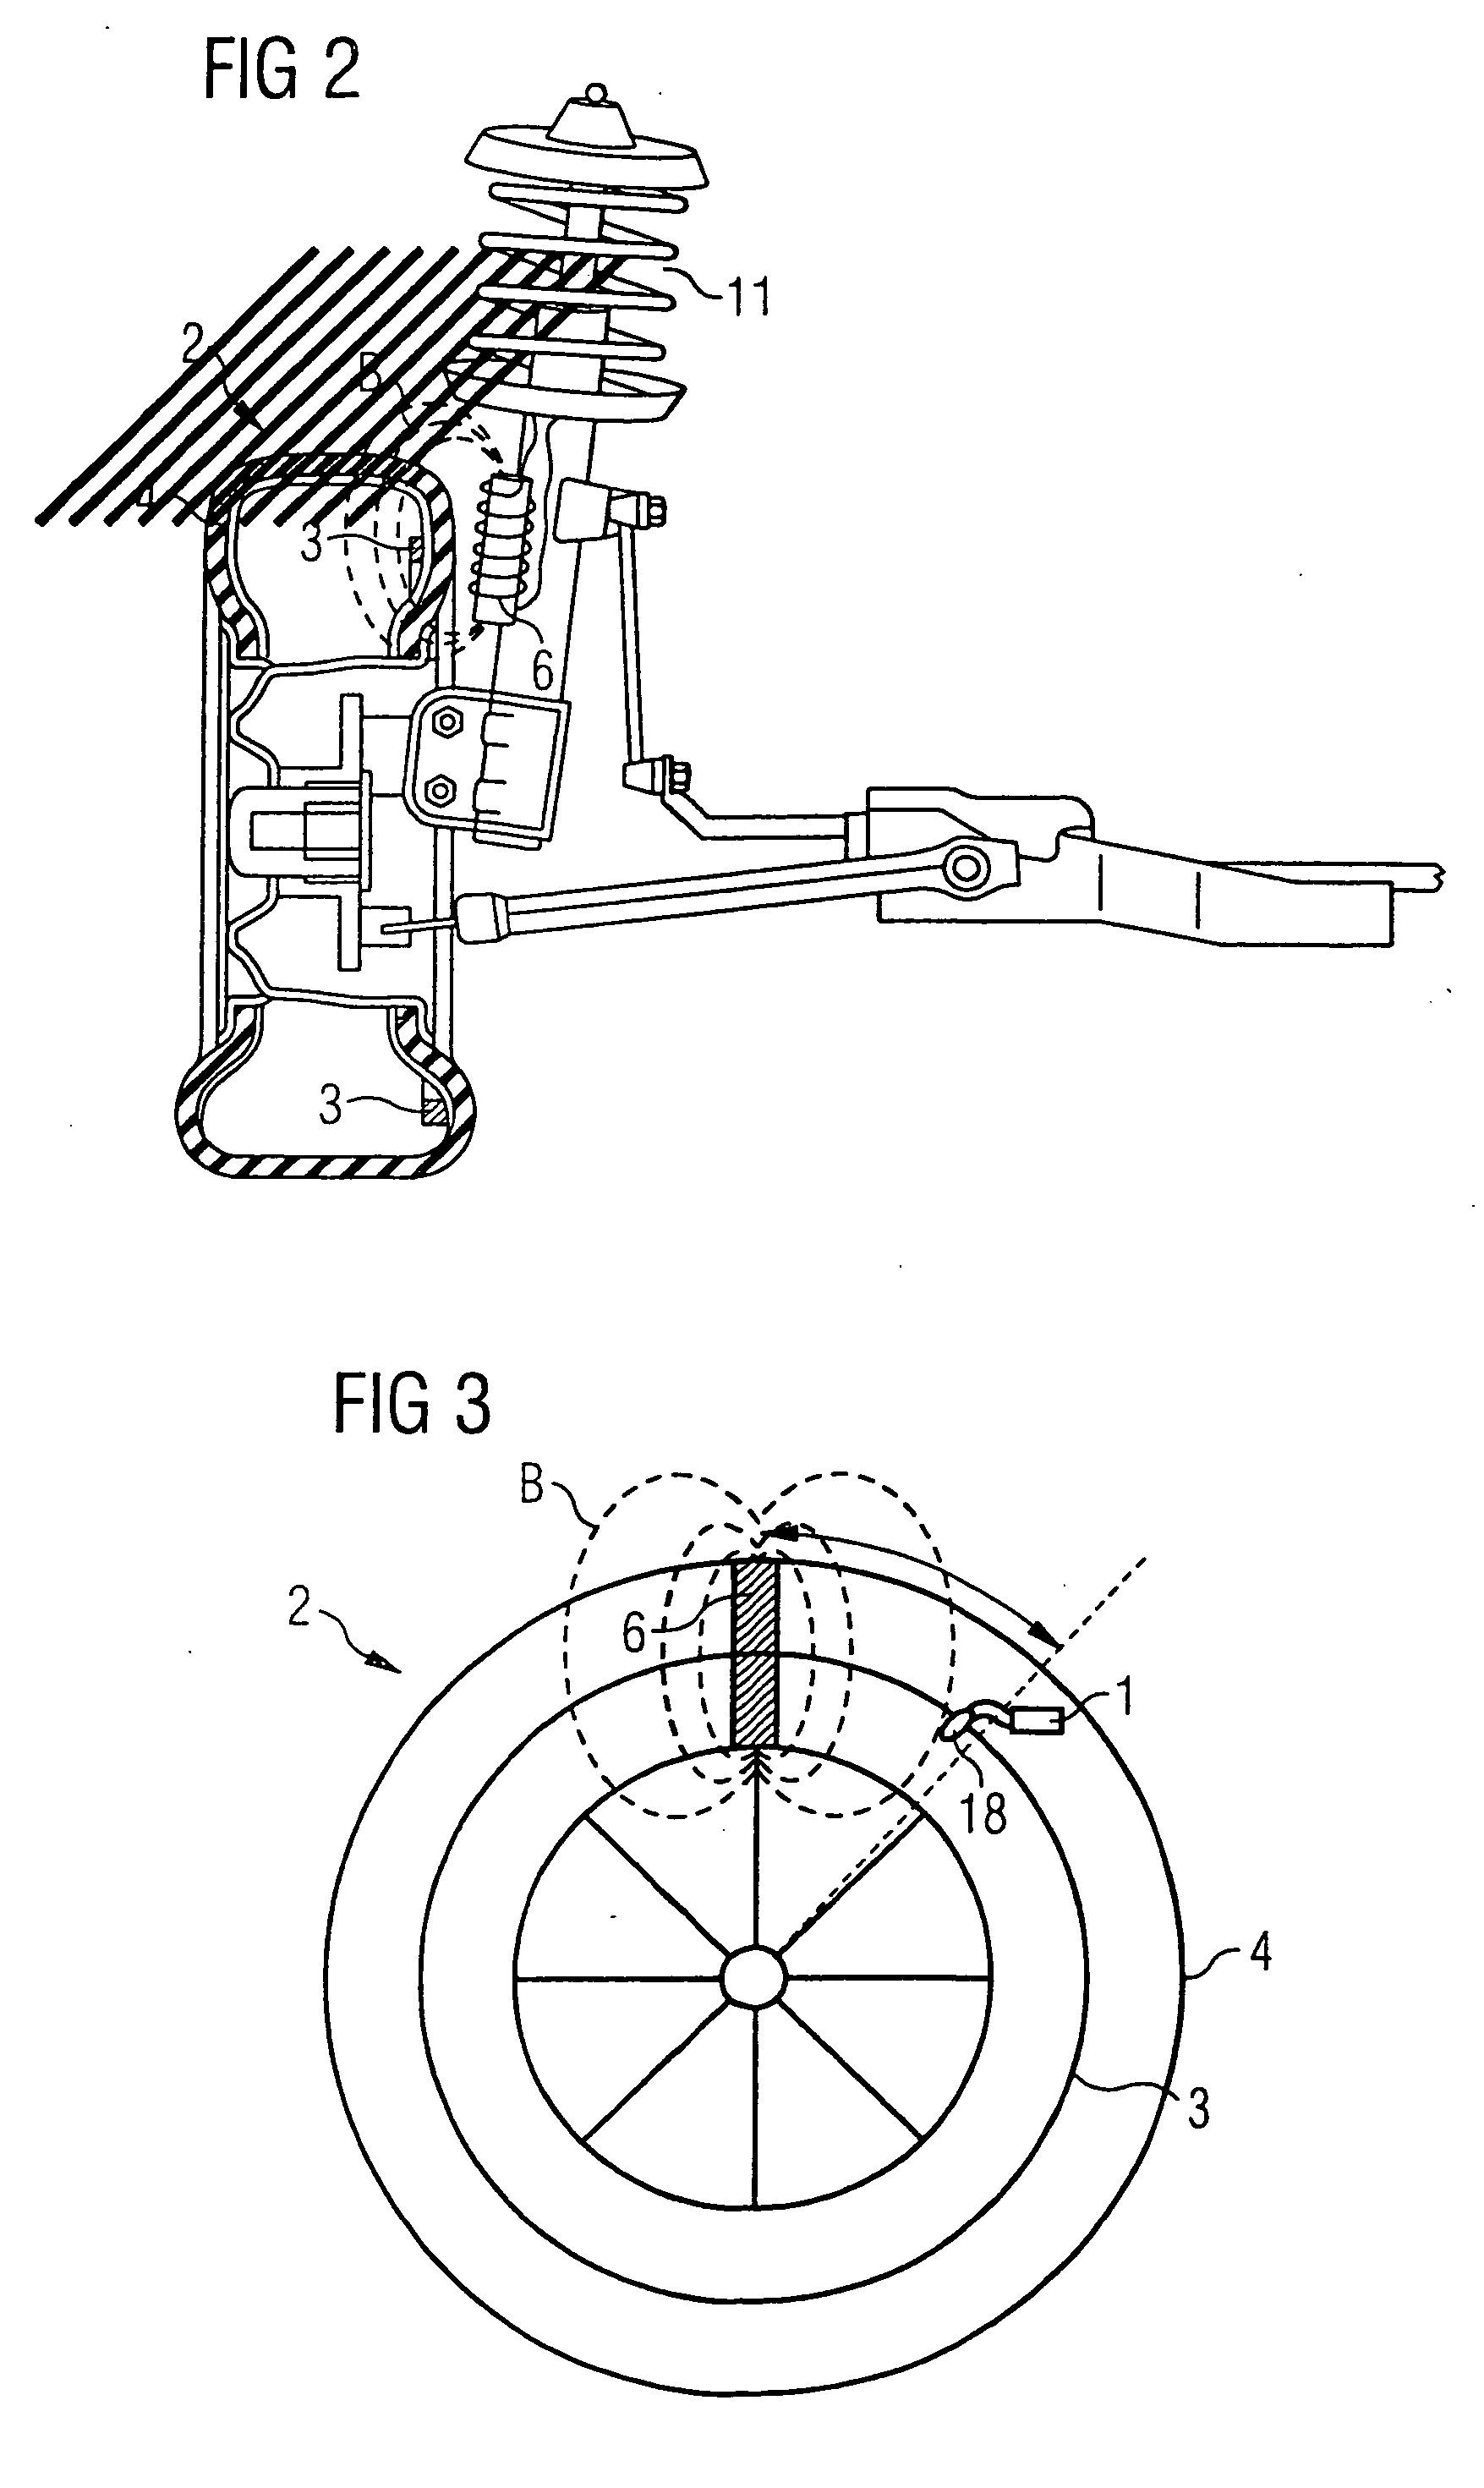 Configuration and method for bidirectional transmission of signals in a motor vehicle